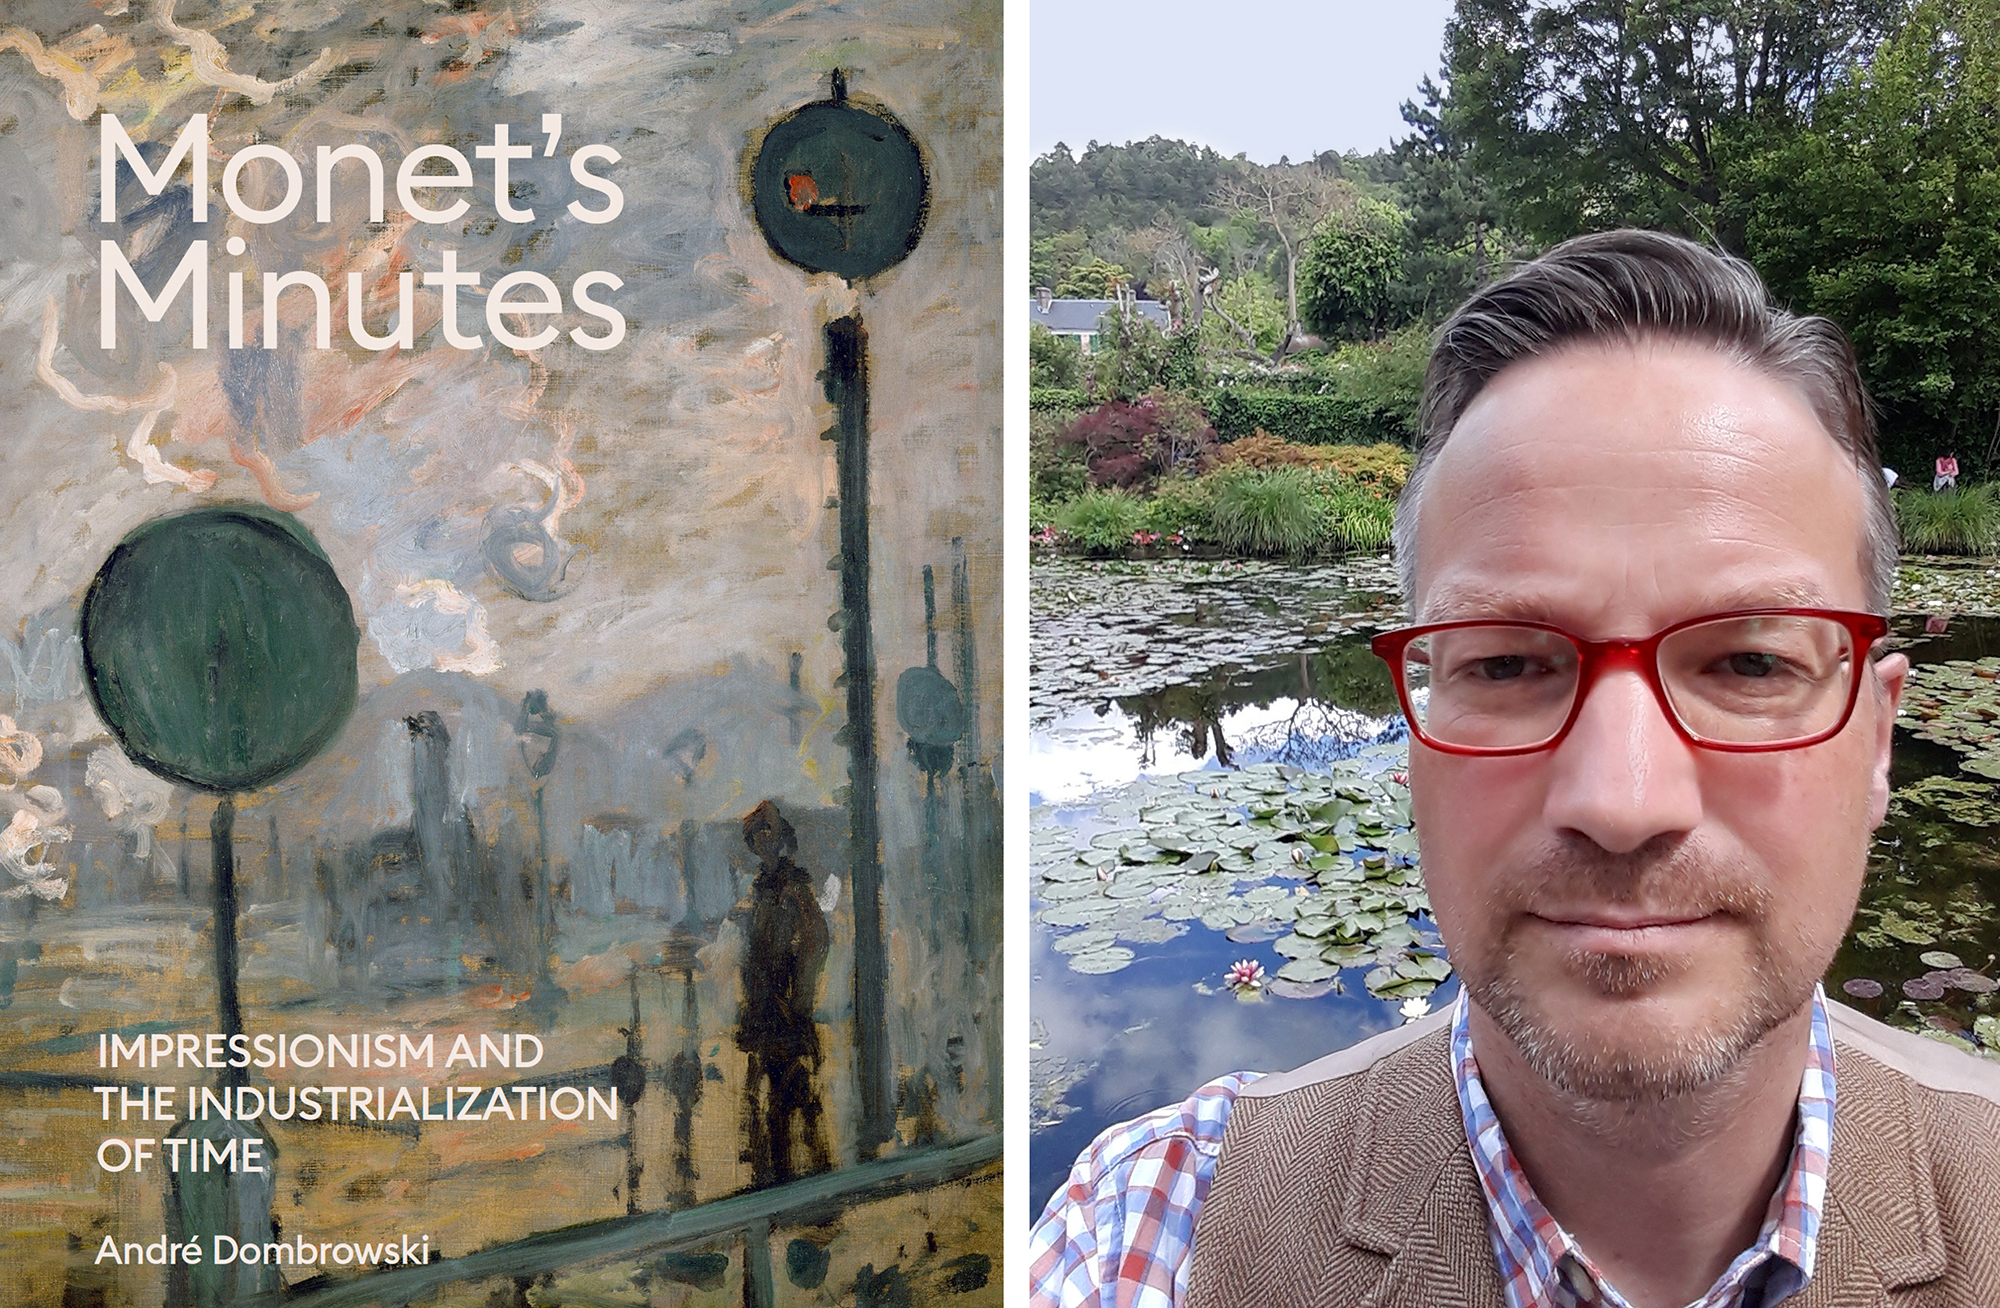 At left, the cover to the book “Monet’s Minutes”; at right, André Dombrowski.